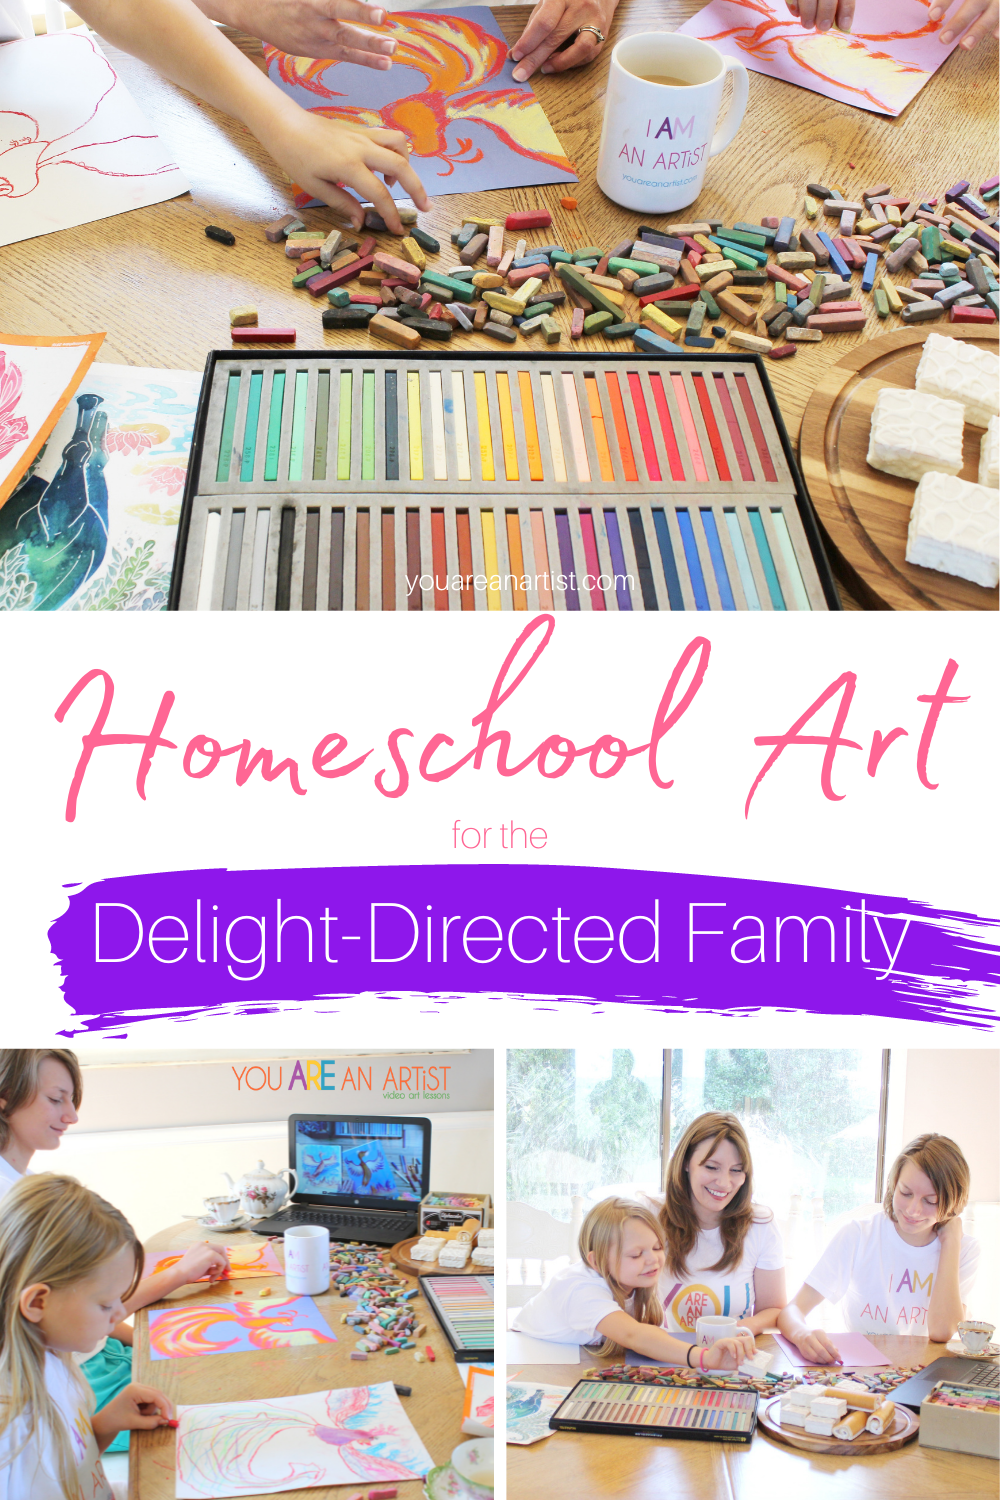 Homeschool Art for the Delight-Directed Family: Experience how a delight-directed family uses the power of art to enhance their child-led learning adventure! You don't have to be artistic or worry about a vast supply list. A simple starter set of chalk pastels, a pack of construction paper, and the You ARE An Artist chalk pastel video art lessons are all you need to get started. #YouAREAnArtist #chalkpastels #homeschoolart #delightdirected #delightdirectedhomeschoolart #delightdirectedfamily #childlededucation #unschooling #strewing #delight-directedhomeschooling 